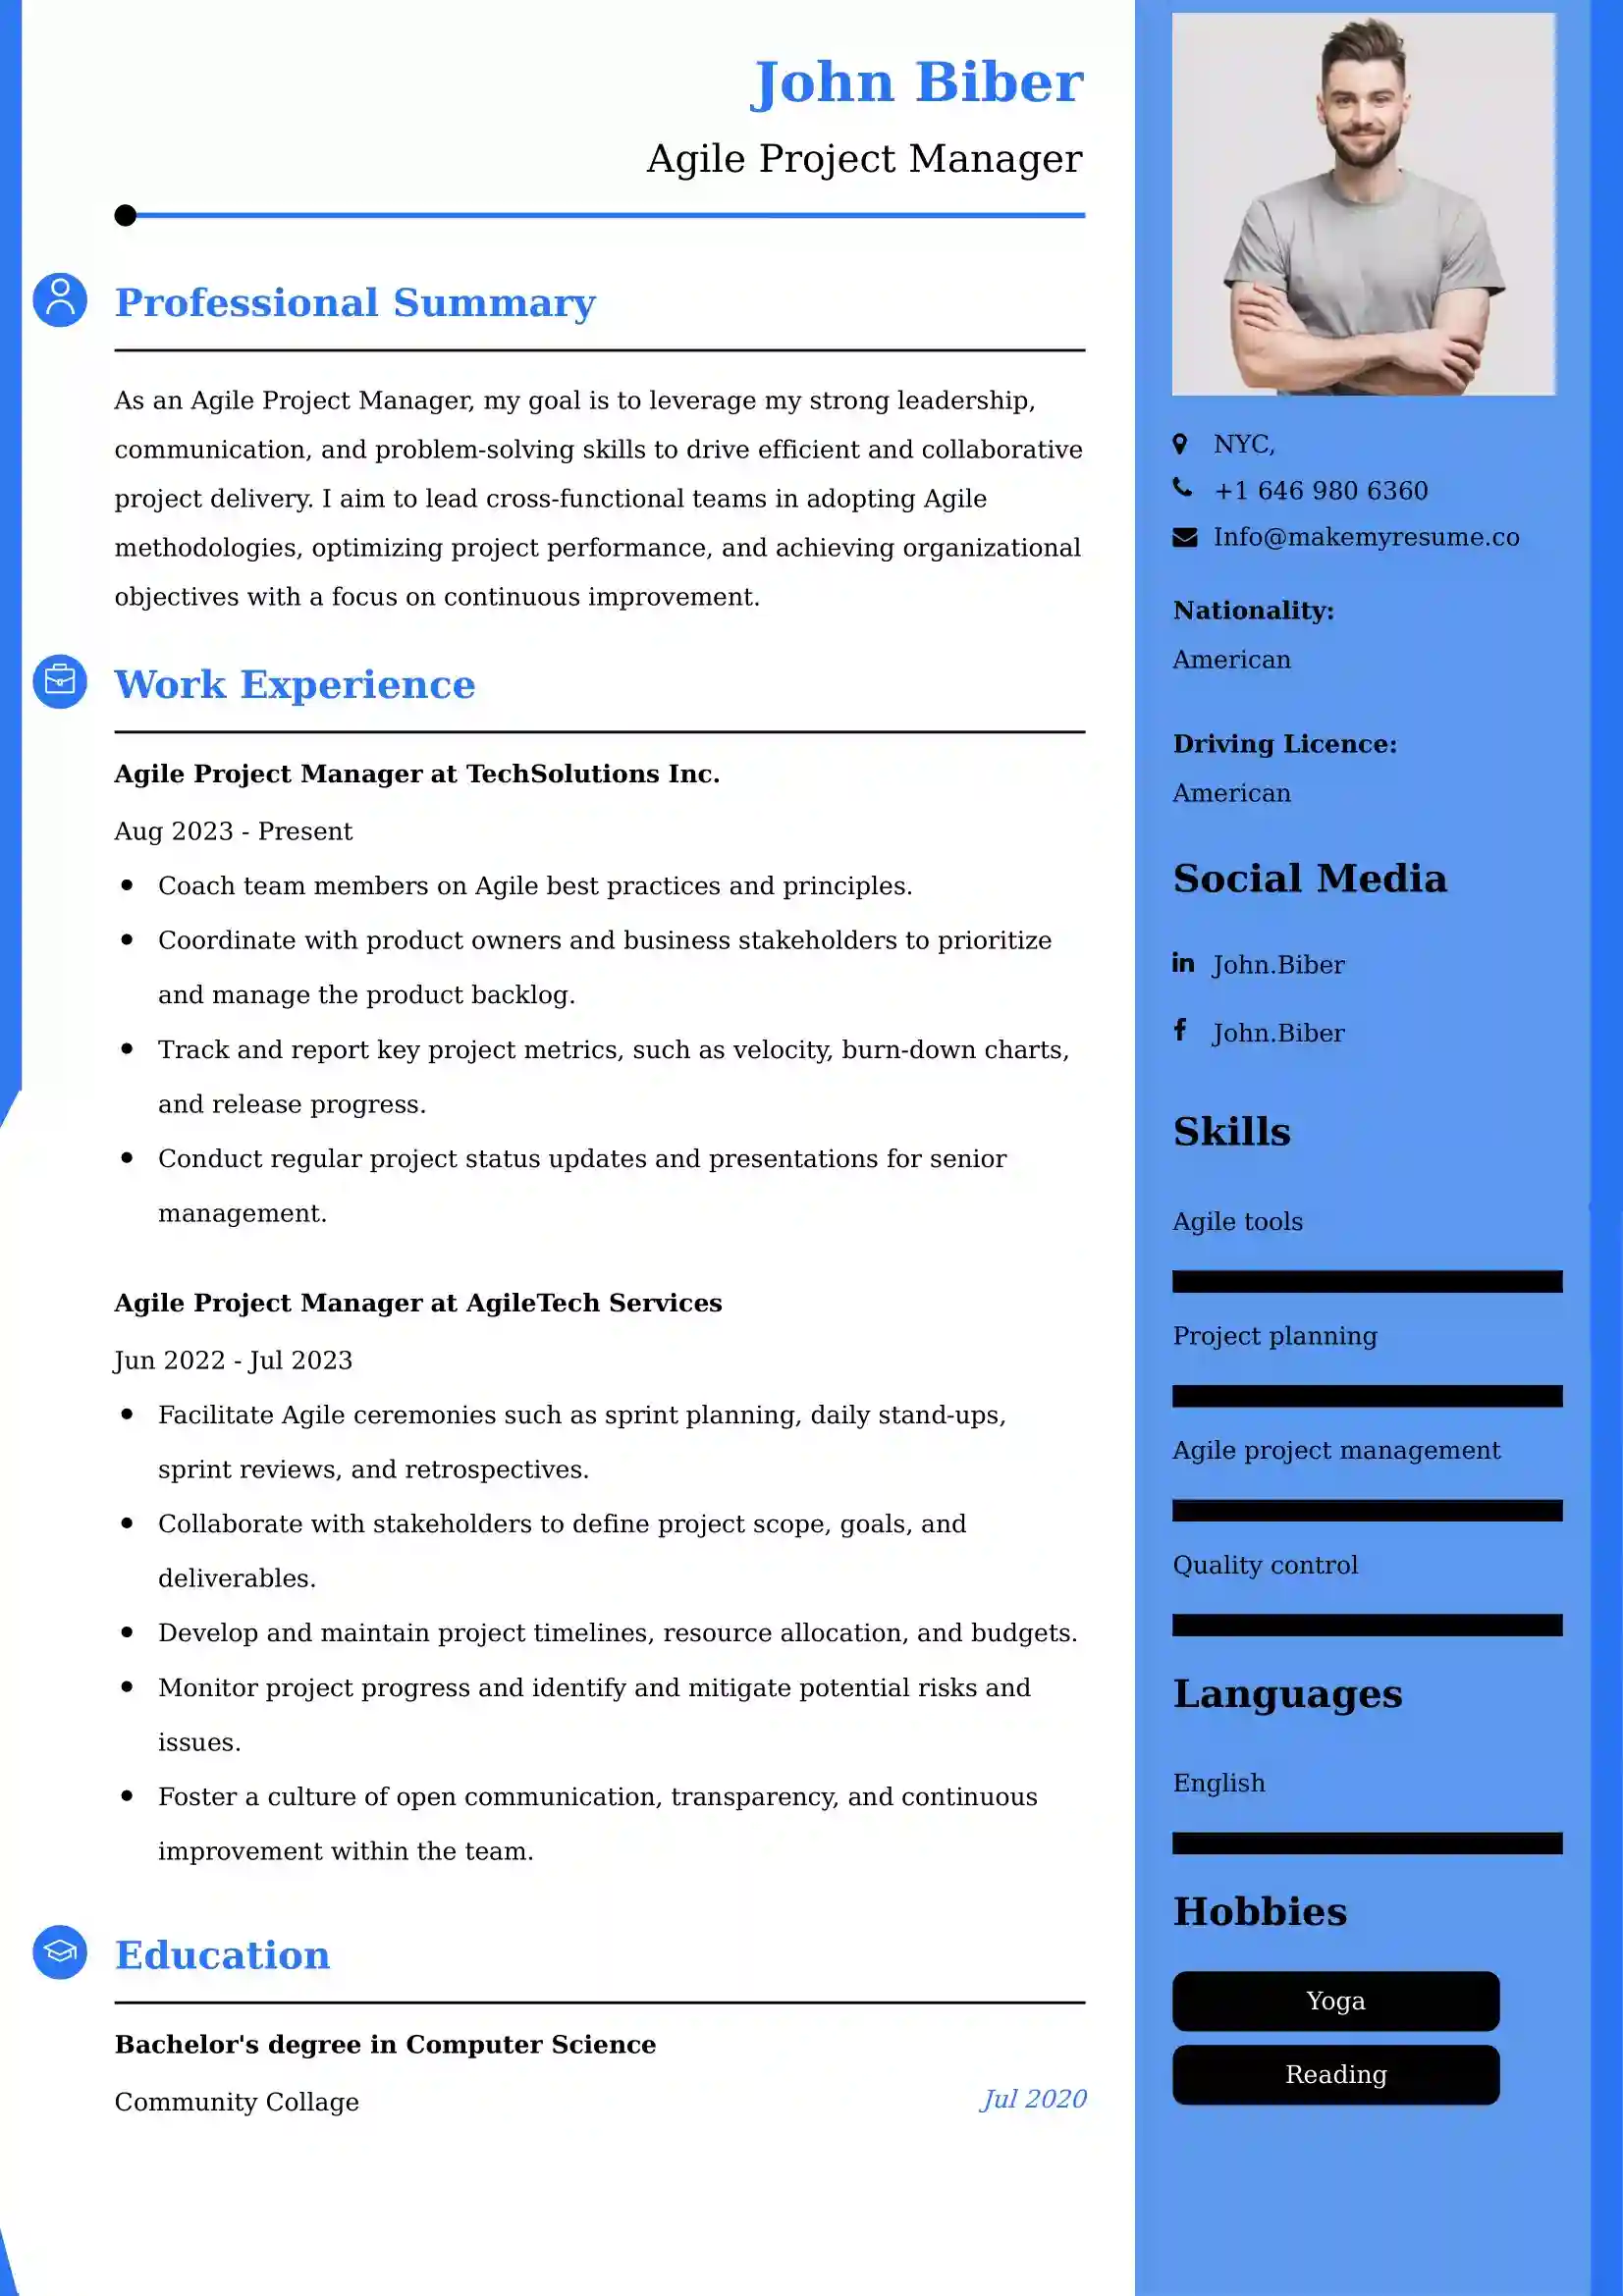 Agile Project Manager Resume Examples - Brazilian Format, Latest Template